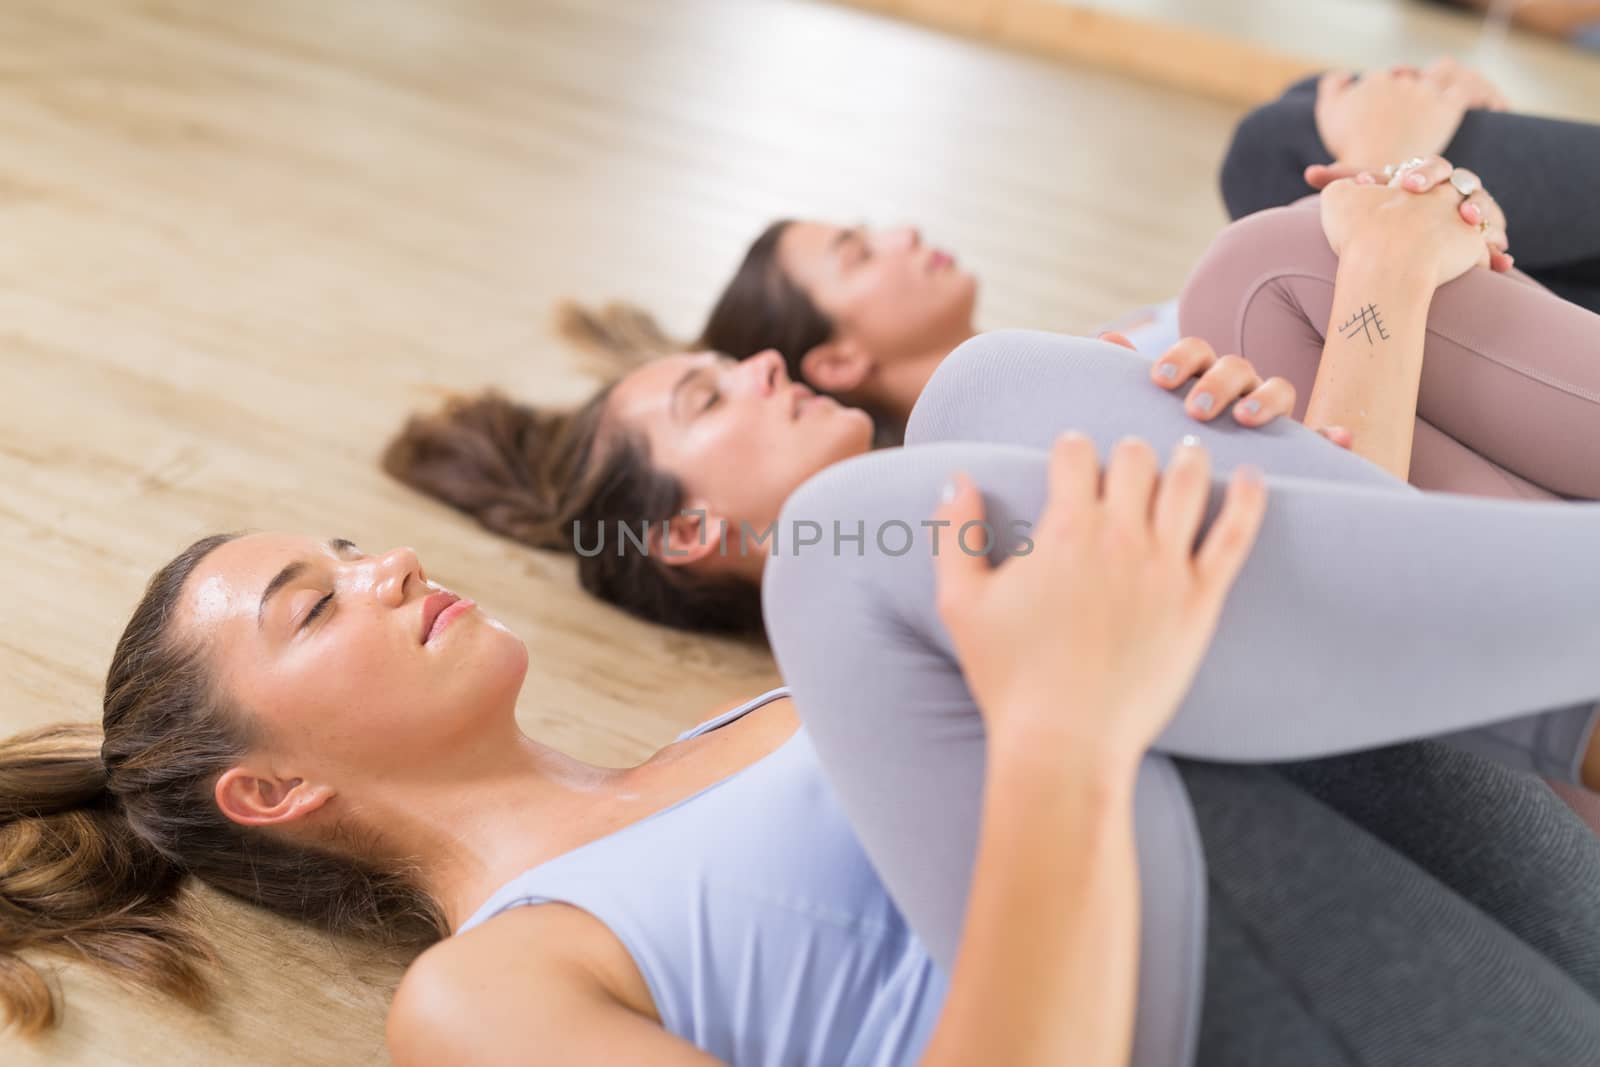 Group of three young sporty attractive women in yoga studio, lying on the floor, stretching and relaxing after the workout. Healthy active lifestyle, working out indoors in gym.